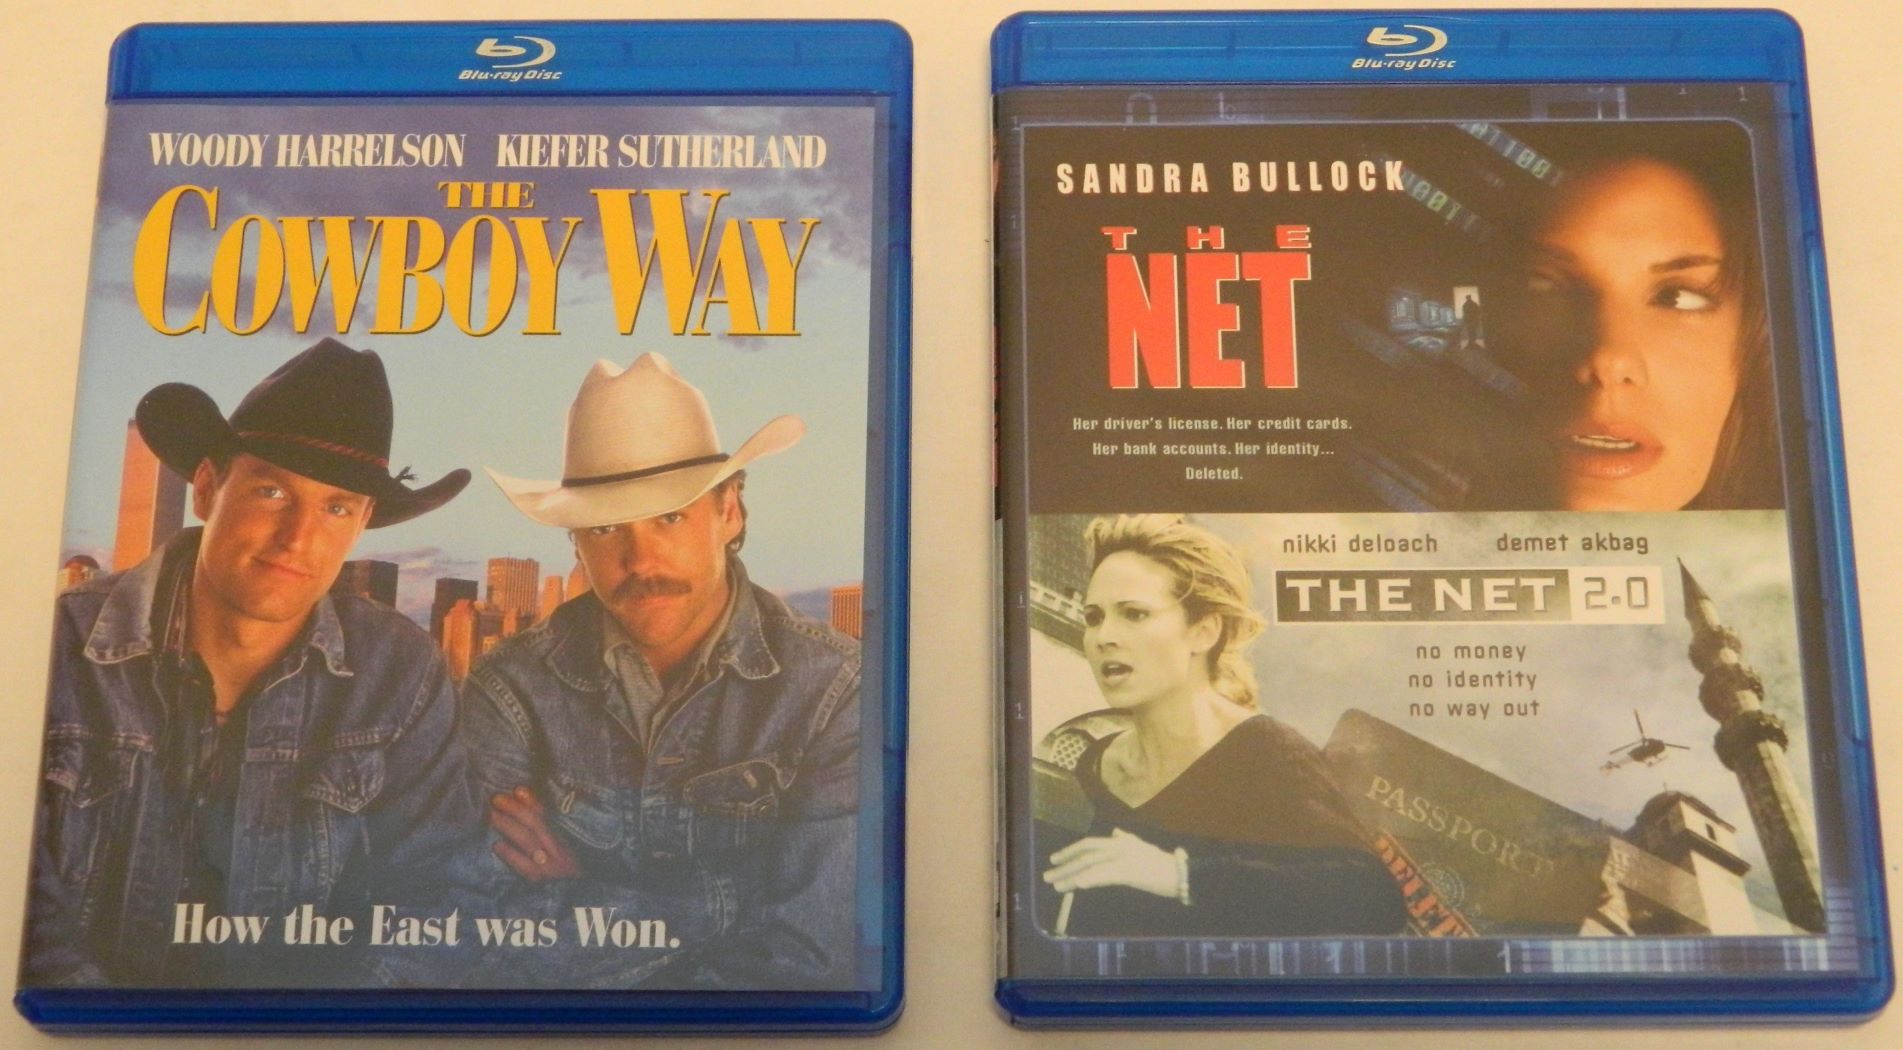 The Cowboy Way and The Net/The Net 2.0 Double Feature Blu-ray Reviews